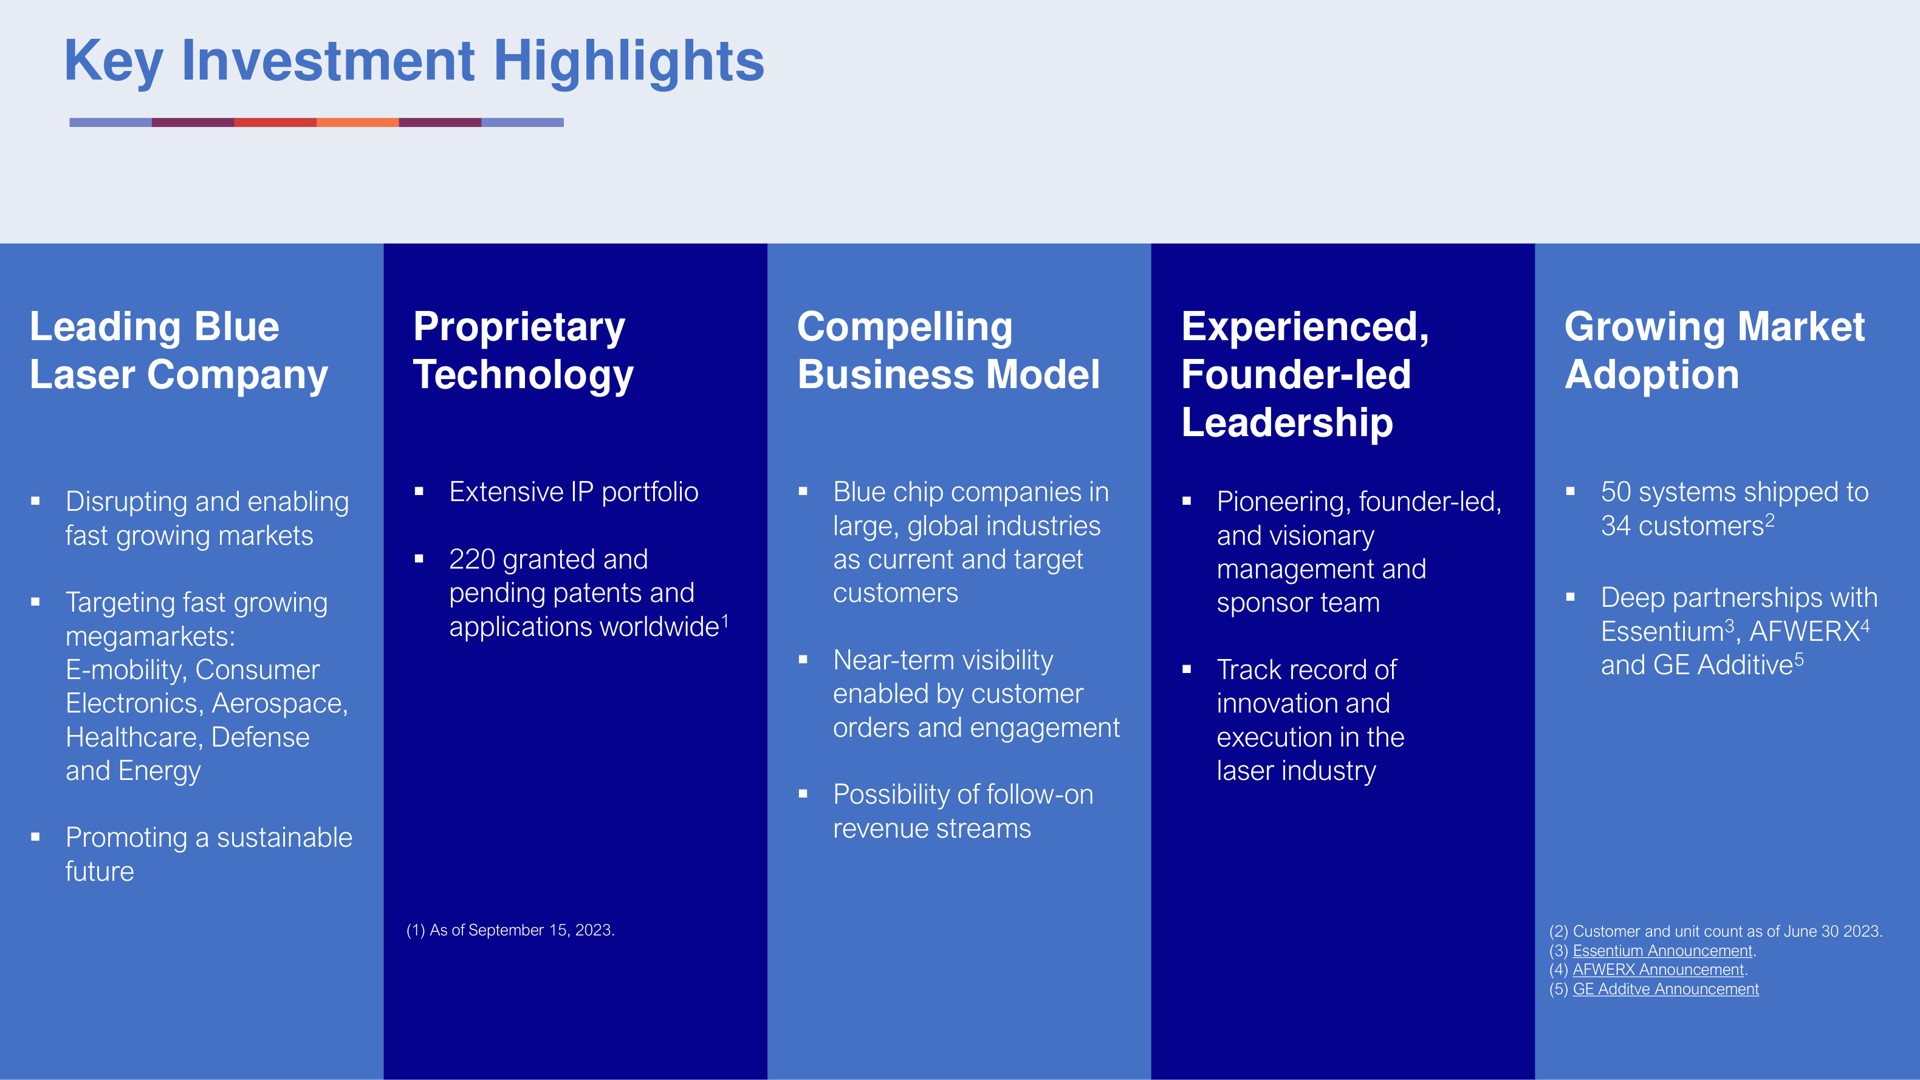 key investment highlights leading blue laser company proprietary technology compelling business model experienced founder led leadership growing market adoption mobility consumer electronics defense men celts orders and engagement track record of innovation and execution in the and additive | NUBURU